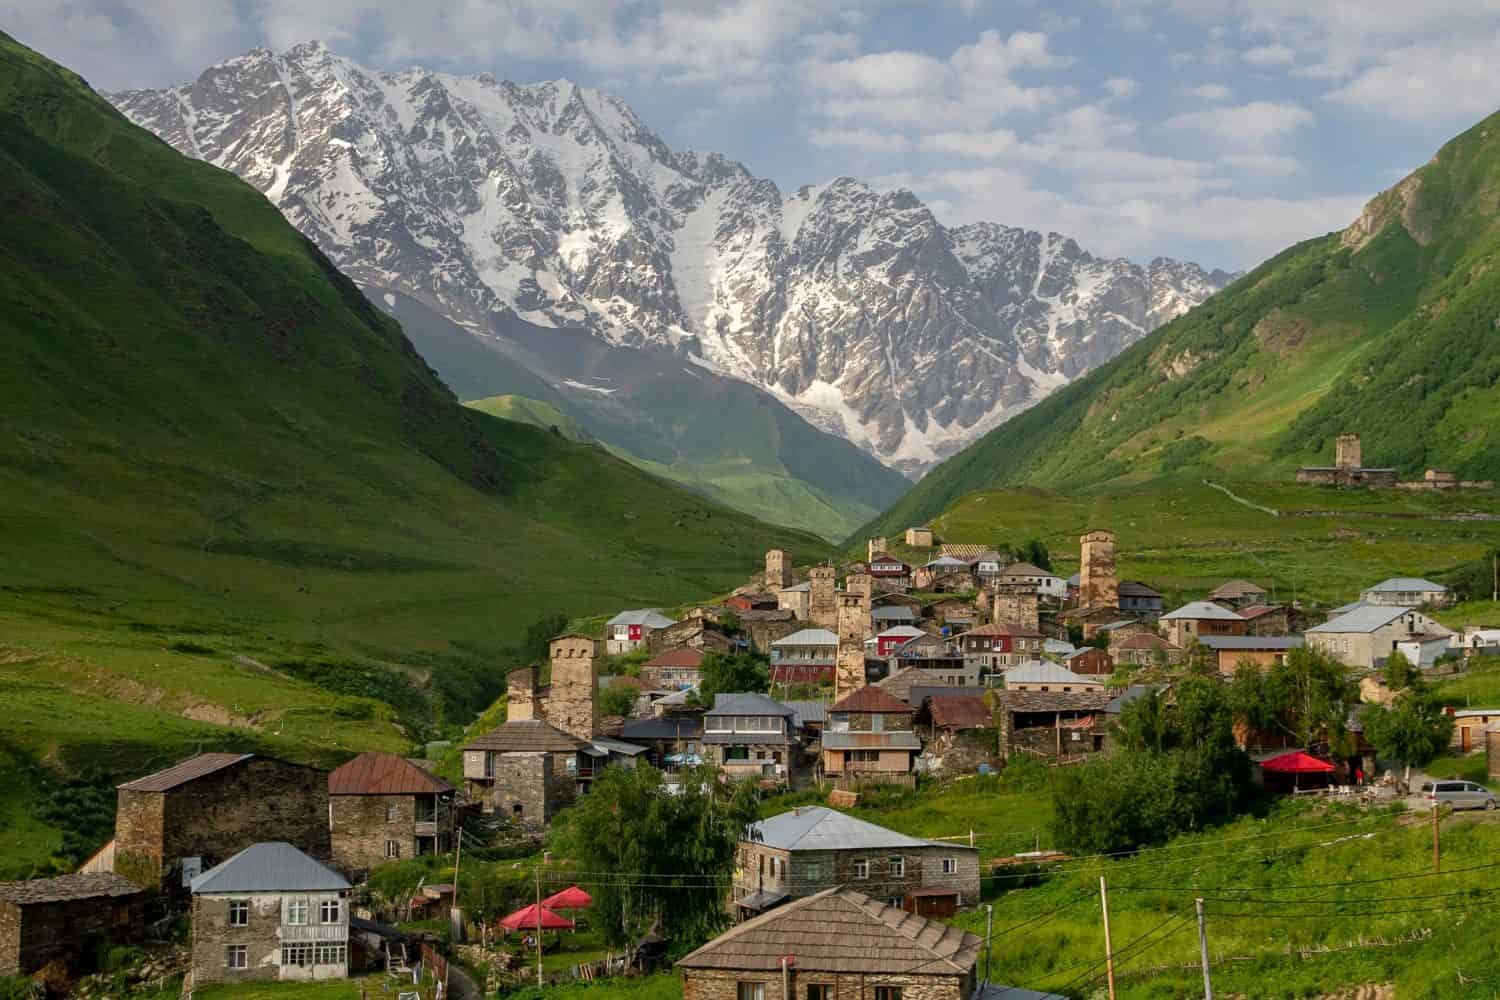 <p>The tallest peak in the country of Georgia is also the third-highest peak in Europe, and that mountain is Shkahara. Shkahara sits along the border of Russia and Georgia and reaches an elevation of 17,037 feet. </p>